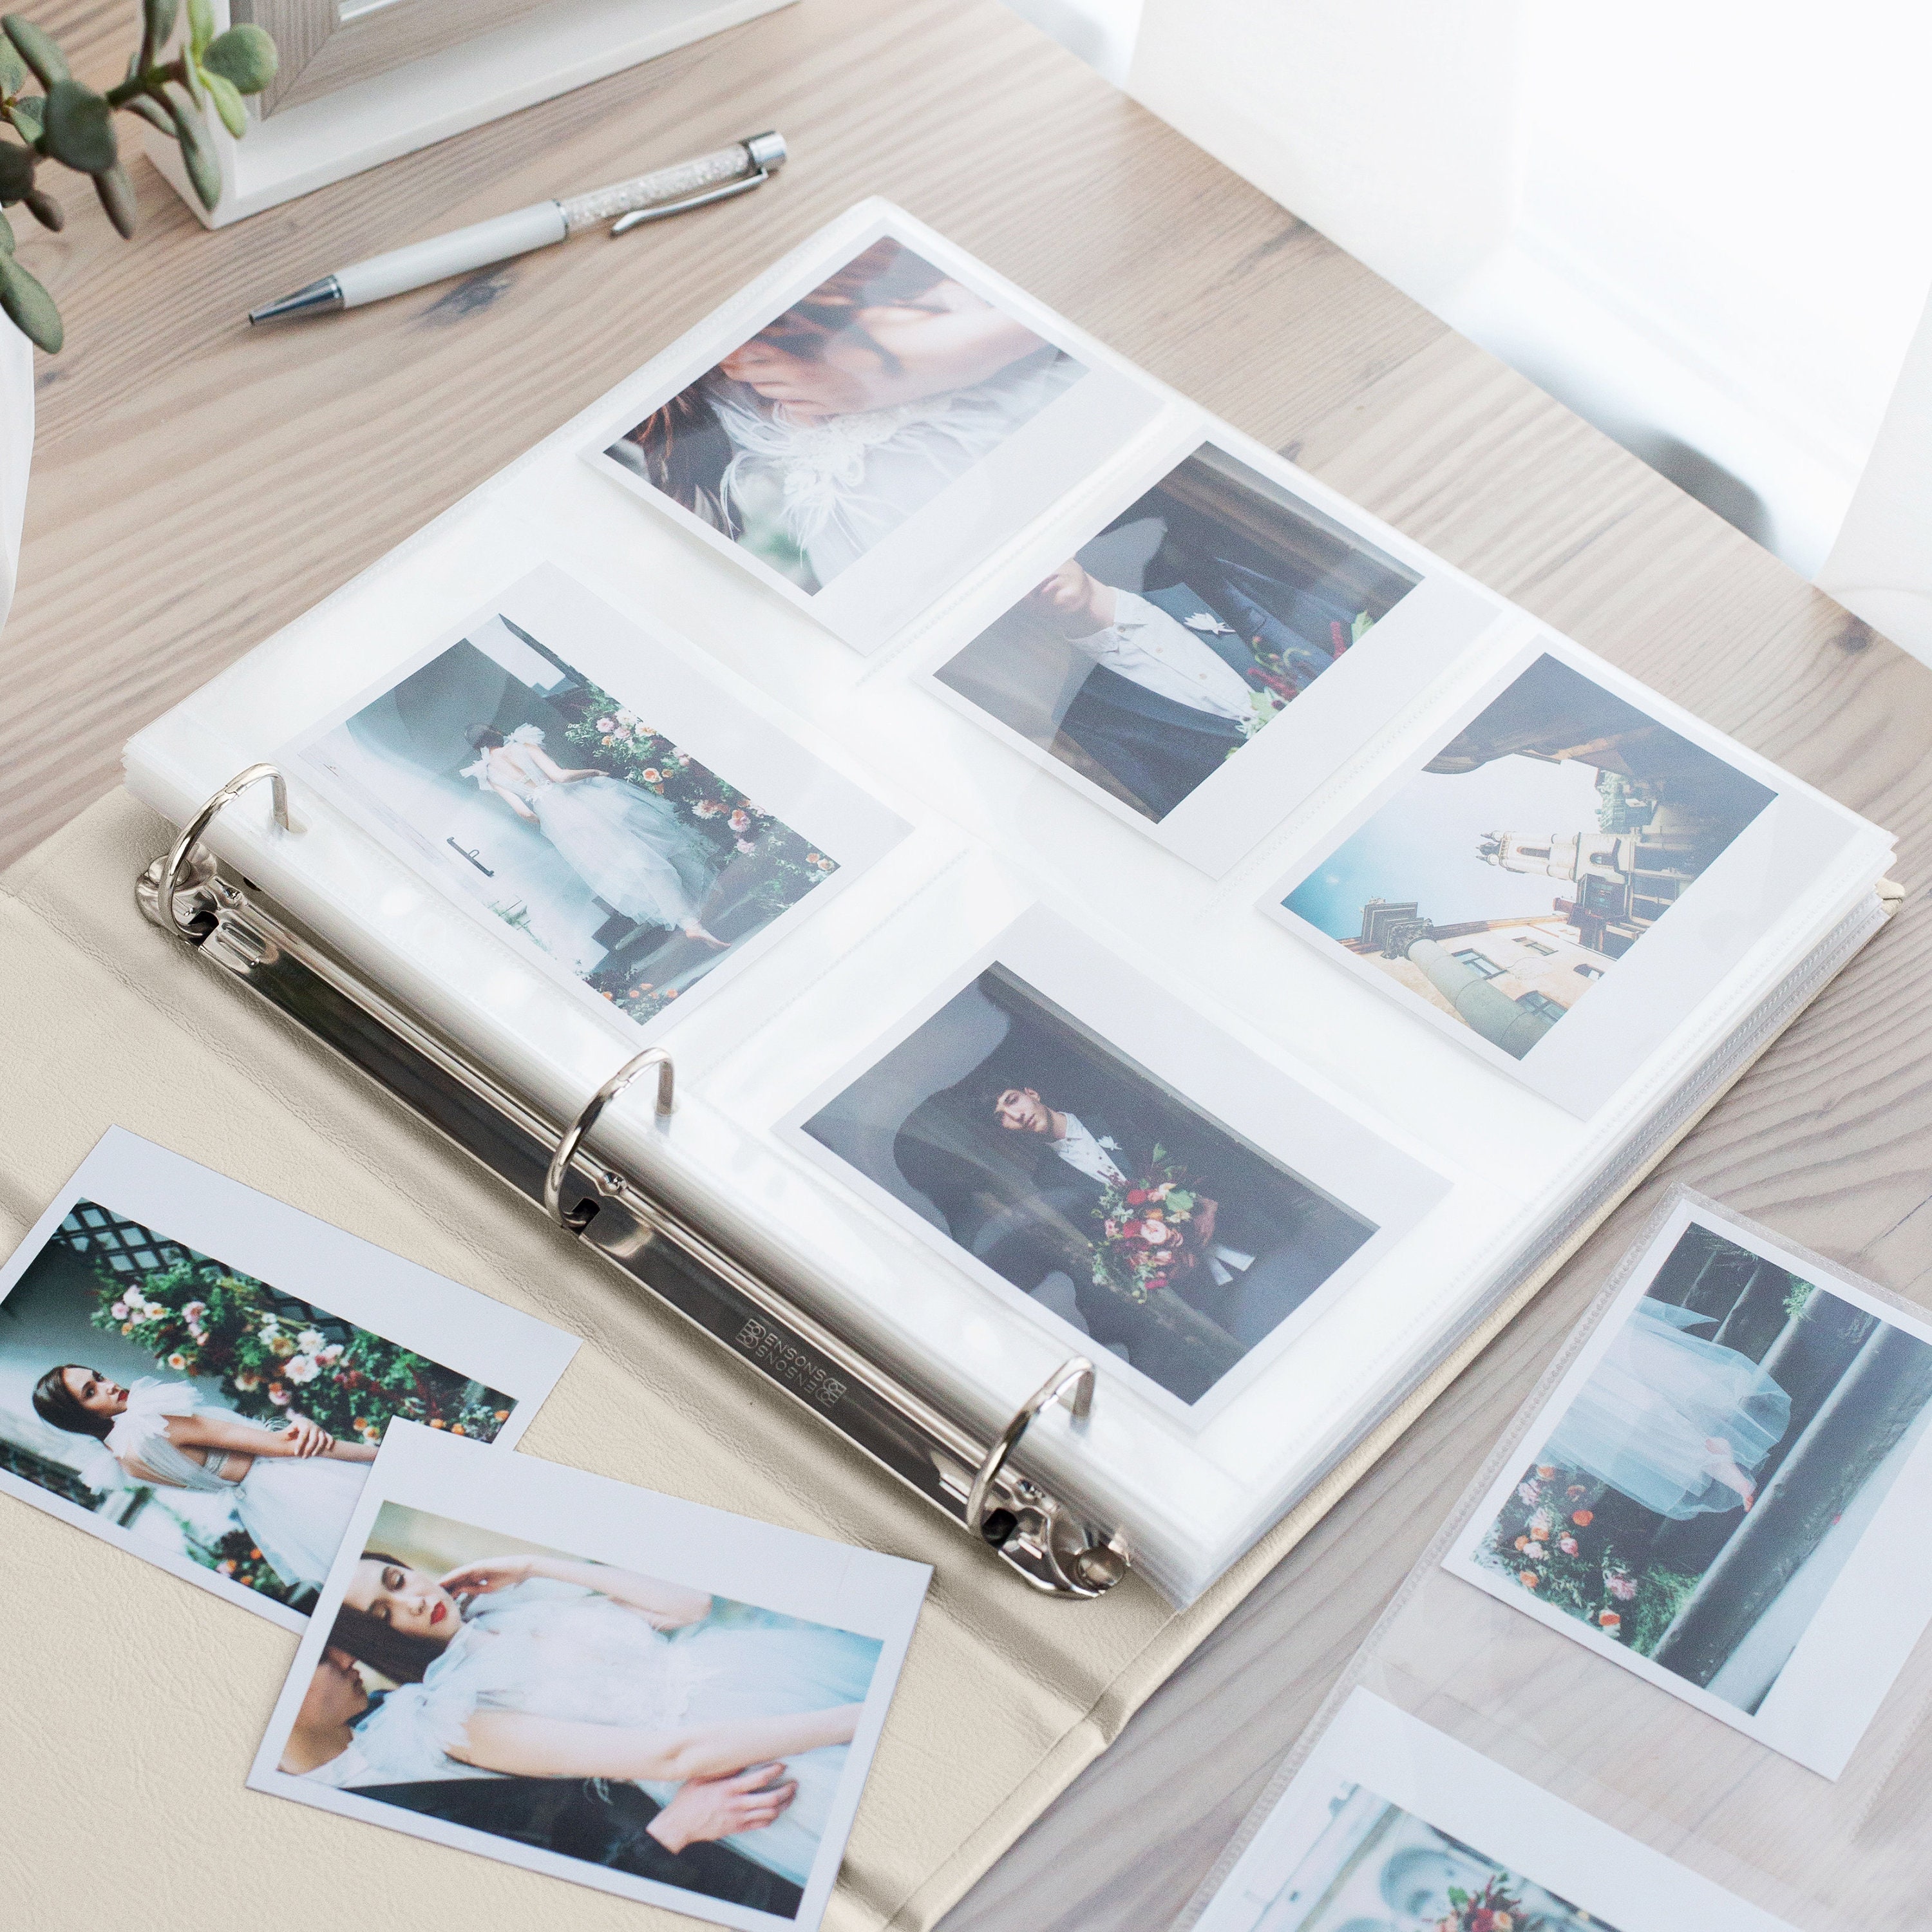 Wedding Guest Book Alternative, Instax Mini Album, Wedding Photo Album for  All Instant Films, Vertical Photo Booth Book for All Size Photos 